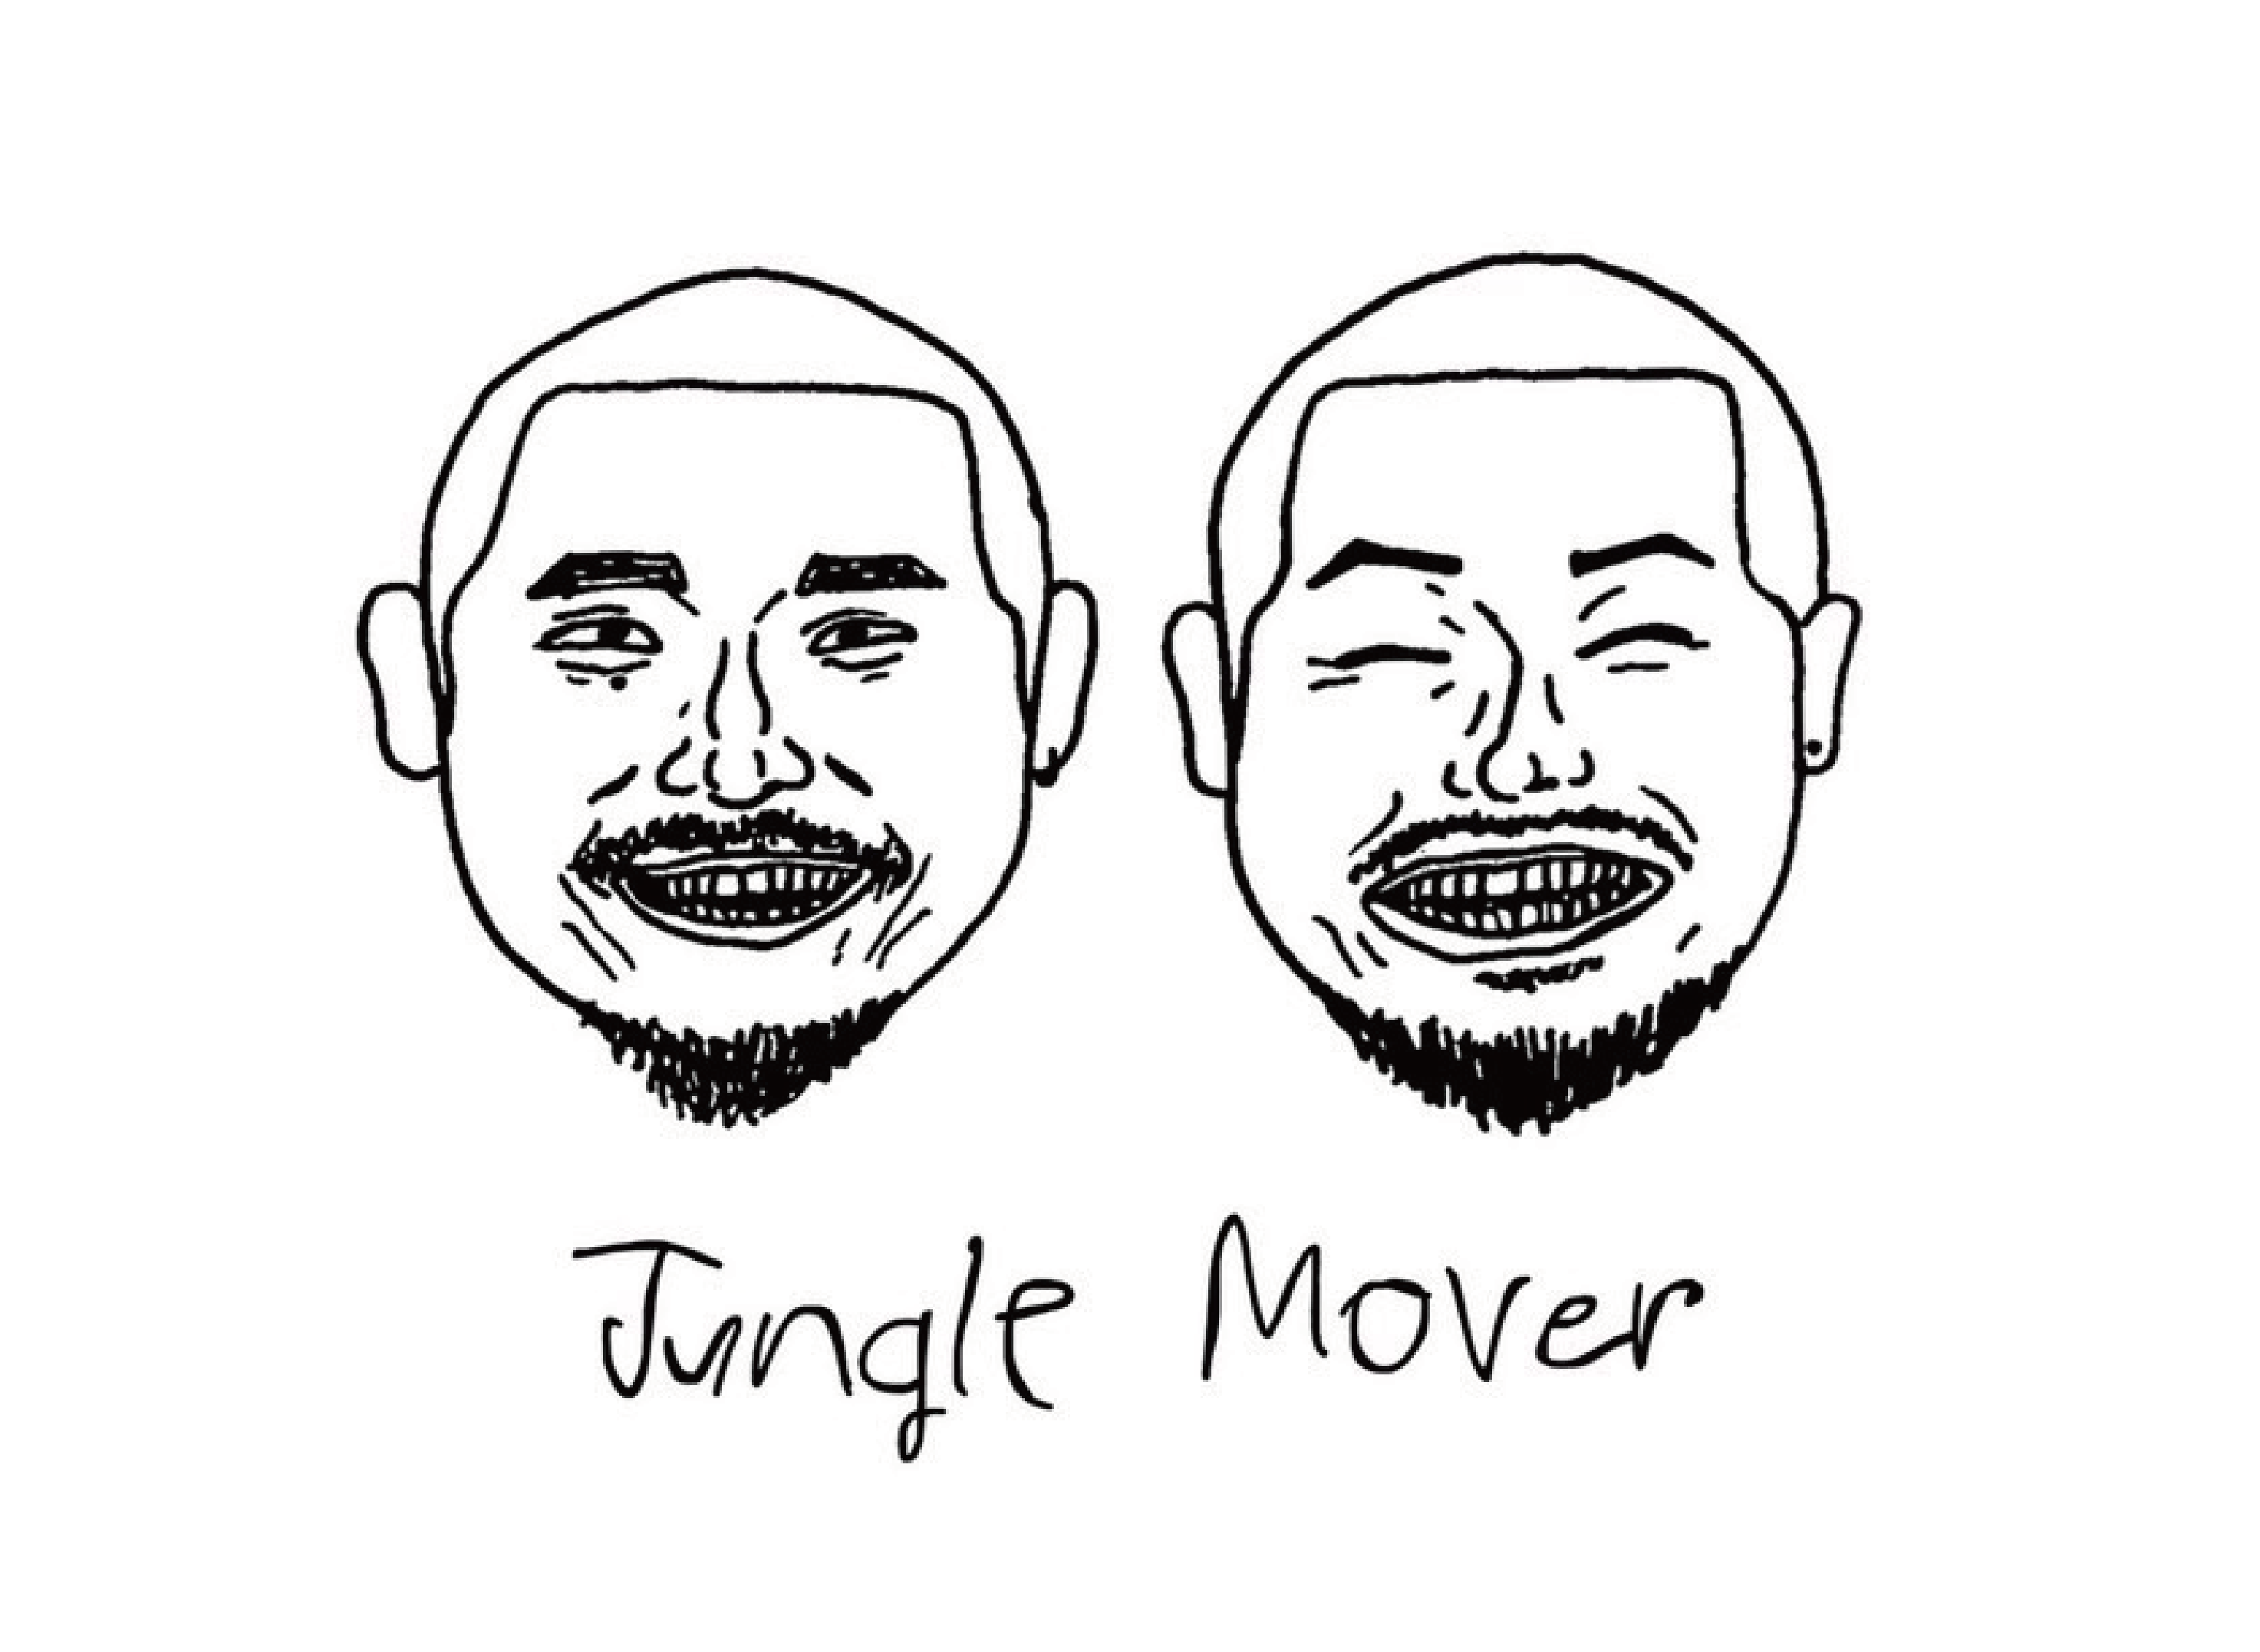 GUEST_K_Jungle_Mover-01.png